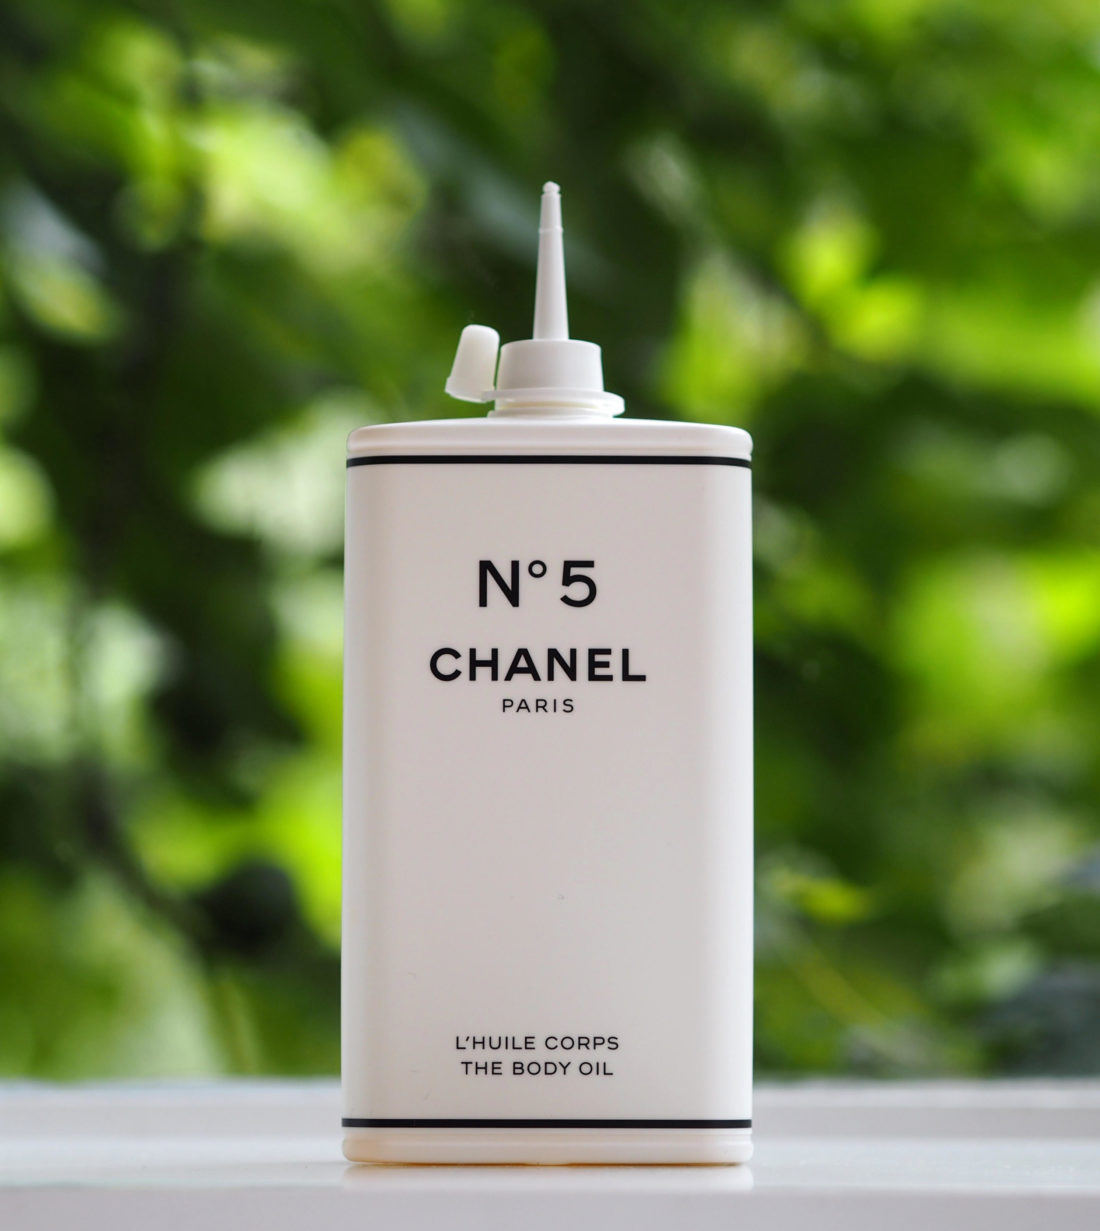 Chanel Cleansing Collection Review - The Beauty Look Book